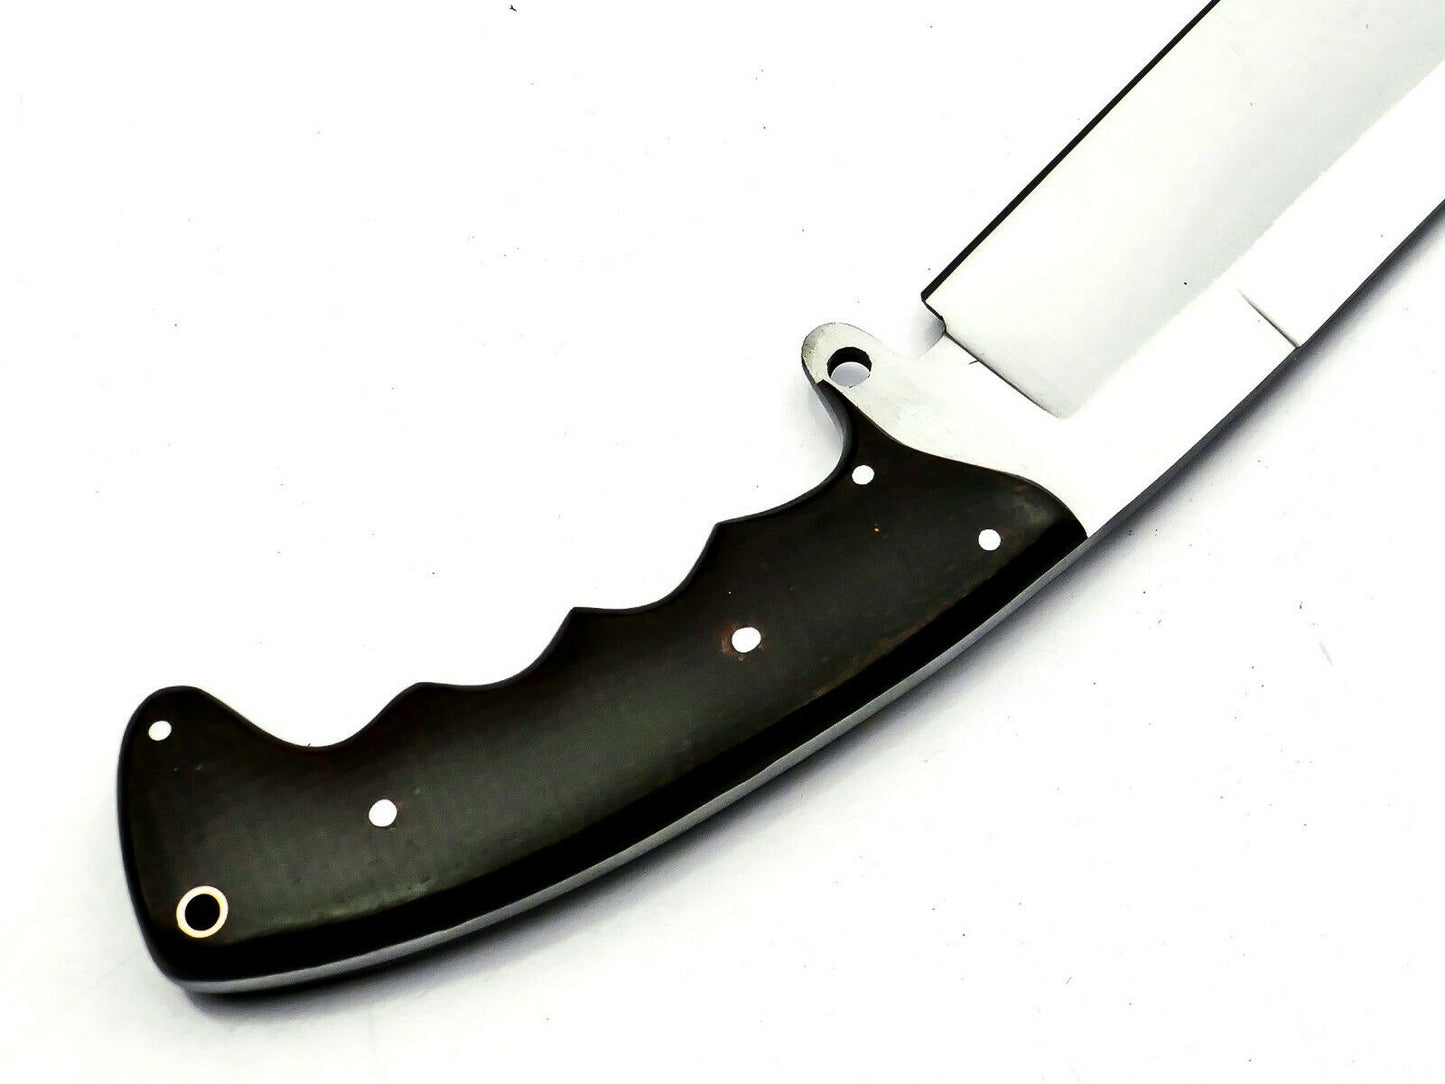 All Purpose Handmade Machete Full Tang Hunting, Tactical,Survival and collectible knife, SHARP 18” Sheath included